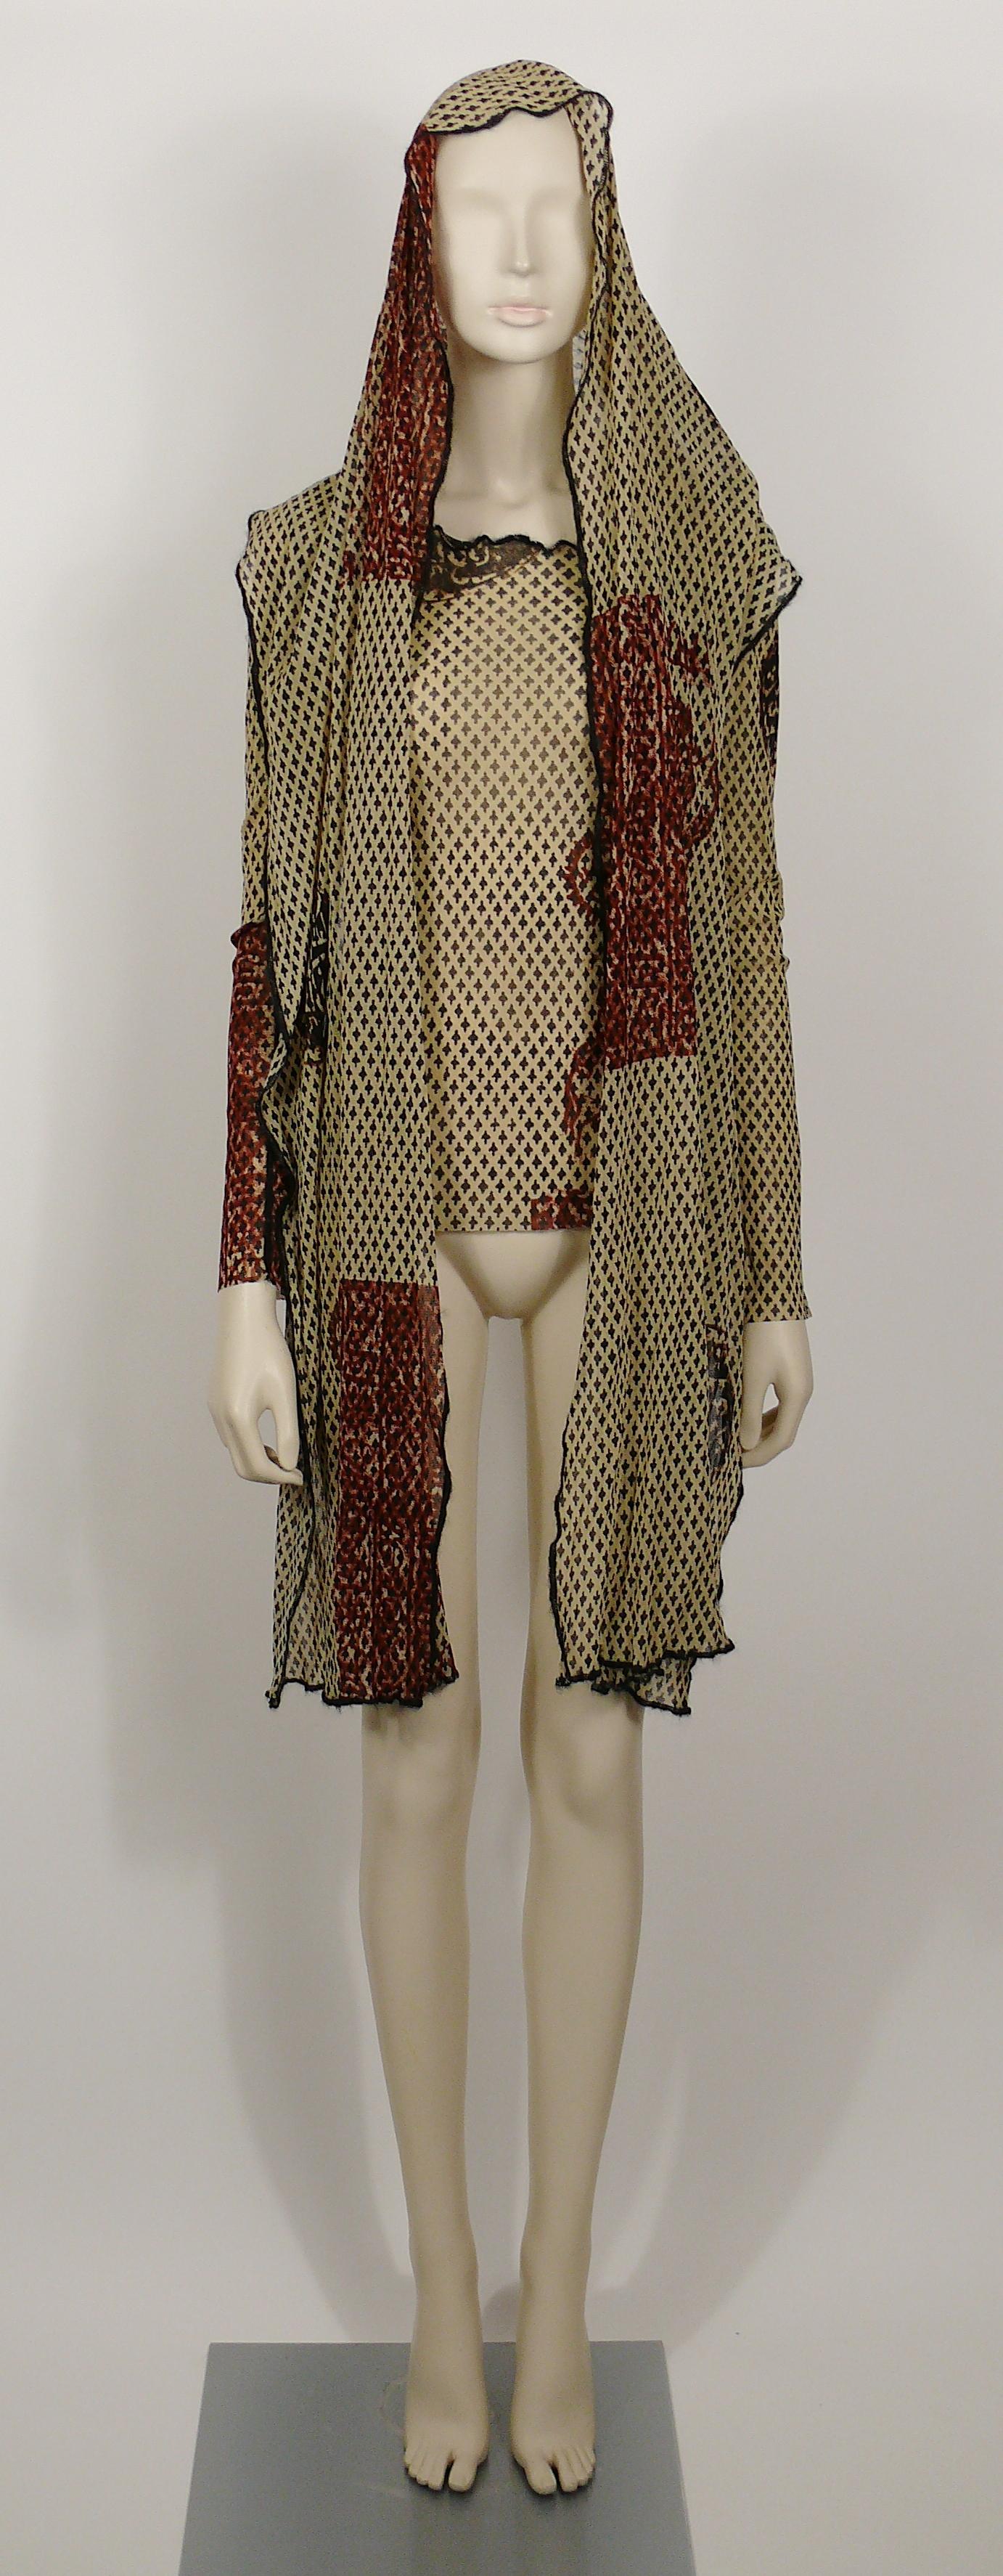 JEAN PAUL GAULTIER vintage oriental print sheer mesh tattoo top with integrated large scarf which can be used in different ways : hood, scarf, scarf collar...

Label reads JEAN PAUL GAULTIER Maille CLASSIQUE Paris.
Made in Italy.

Size label reads :